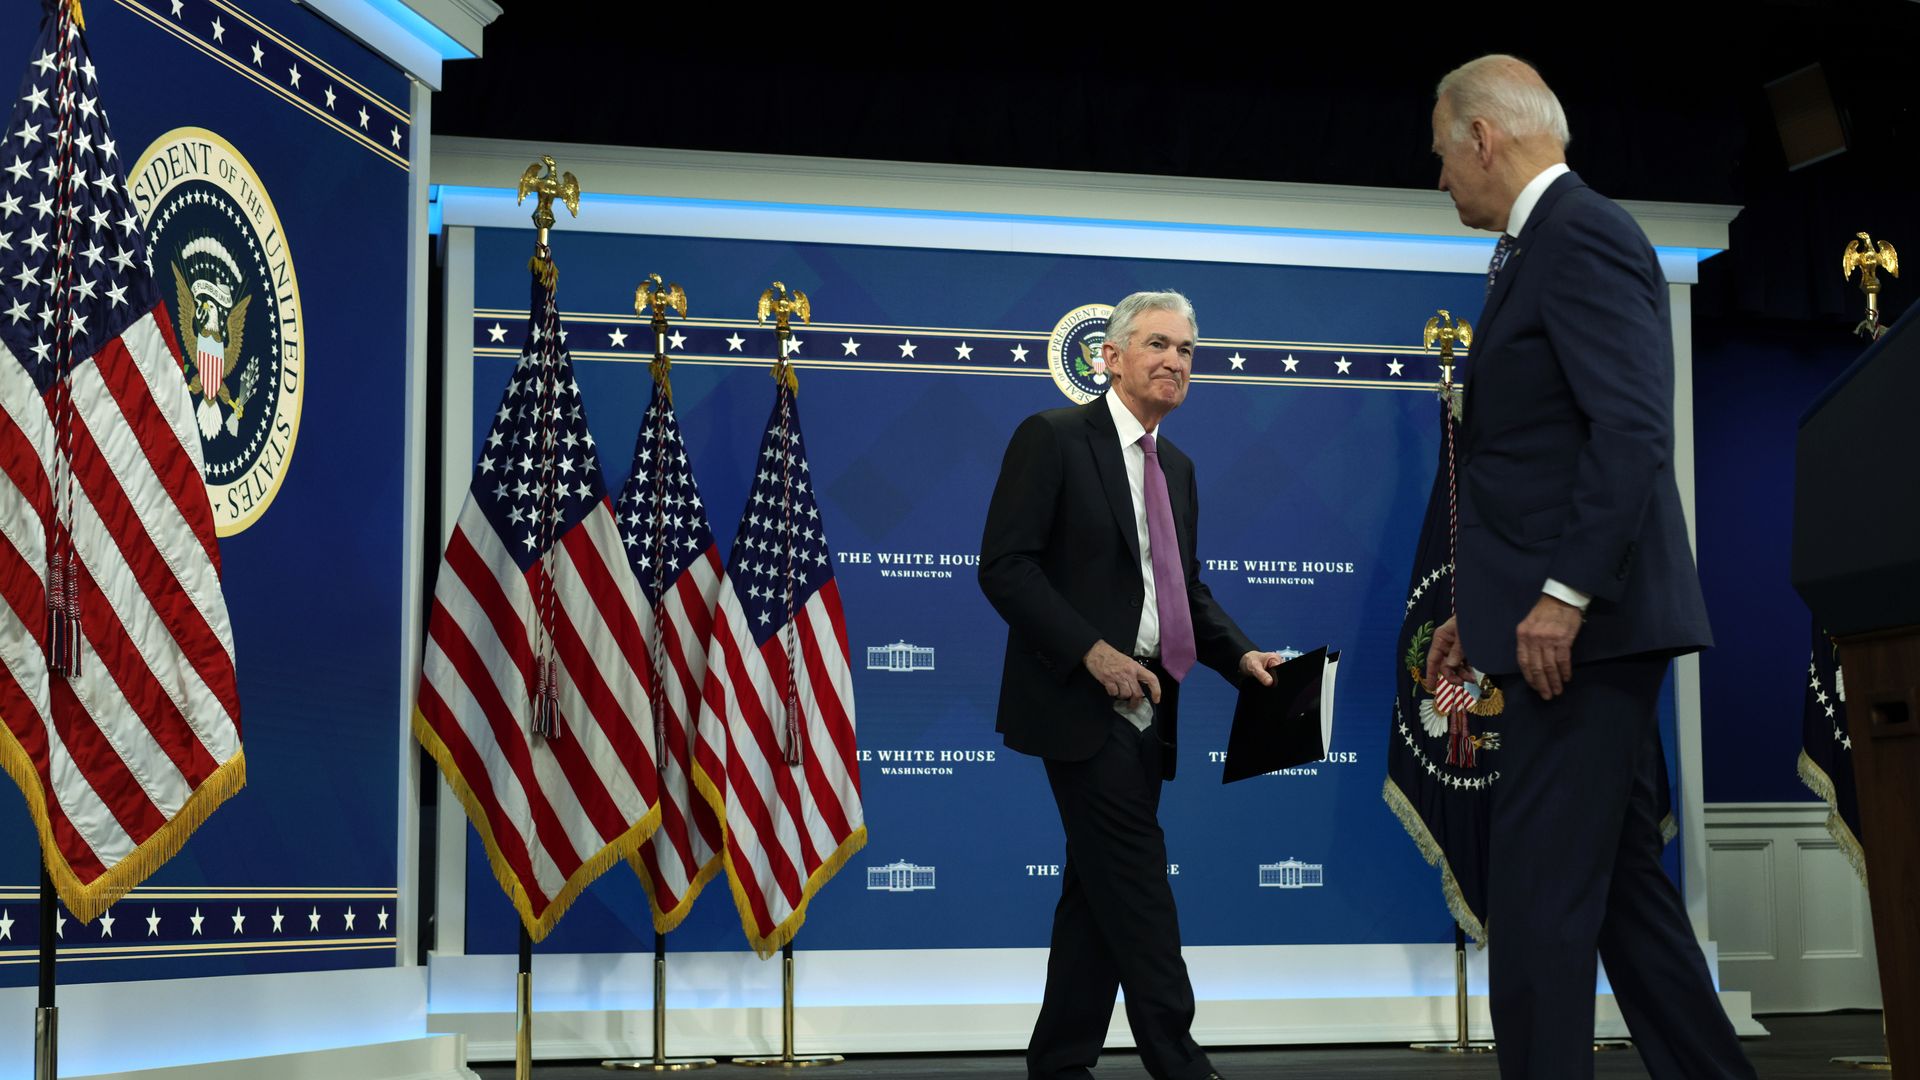 Fed chair Jerome Powell walks to a podium with American flags in the background as President Biden watches